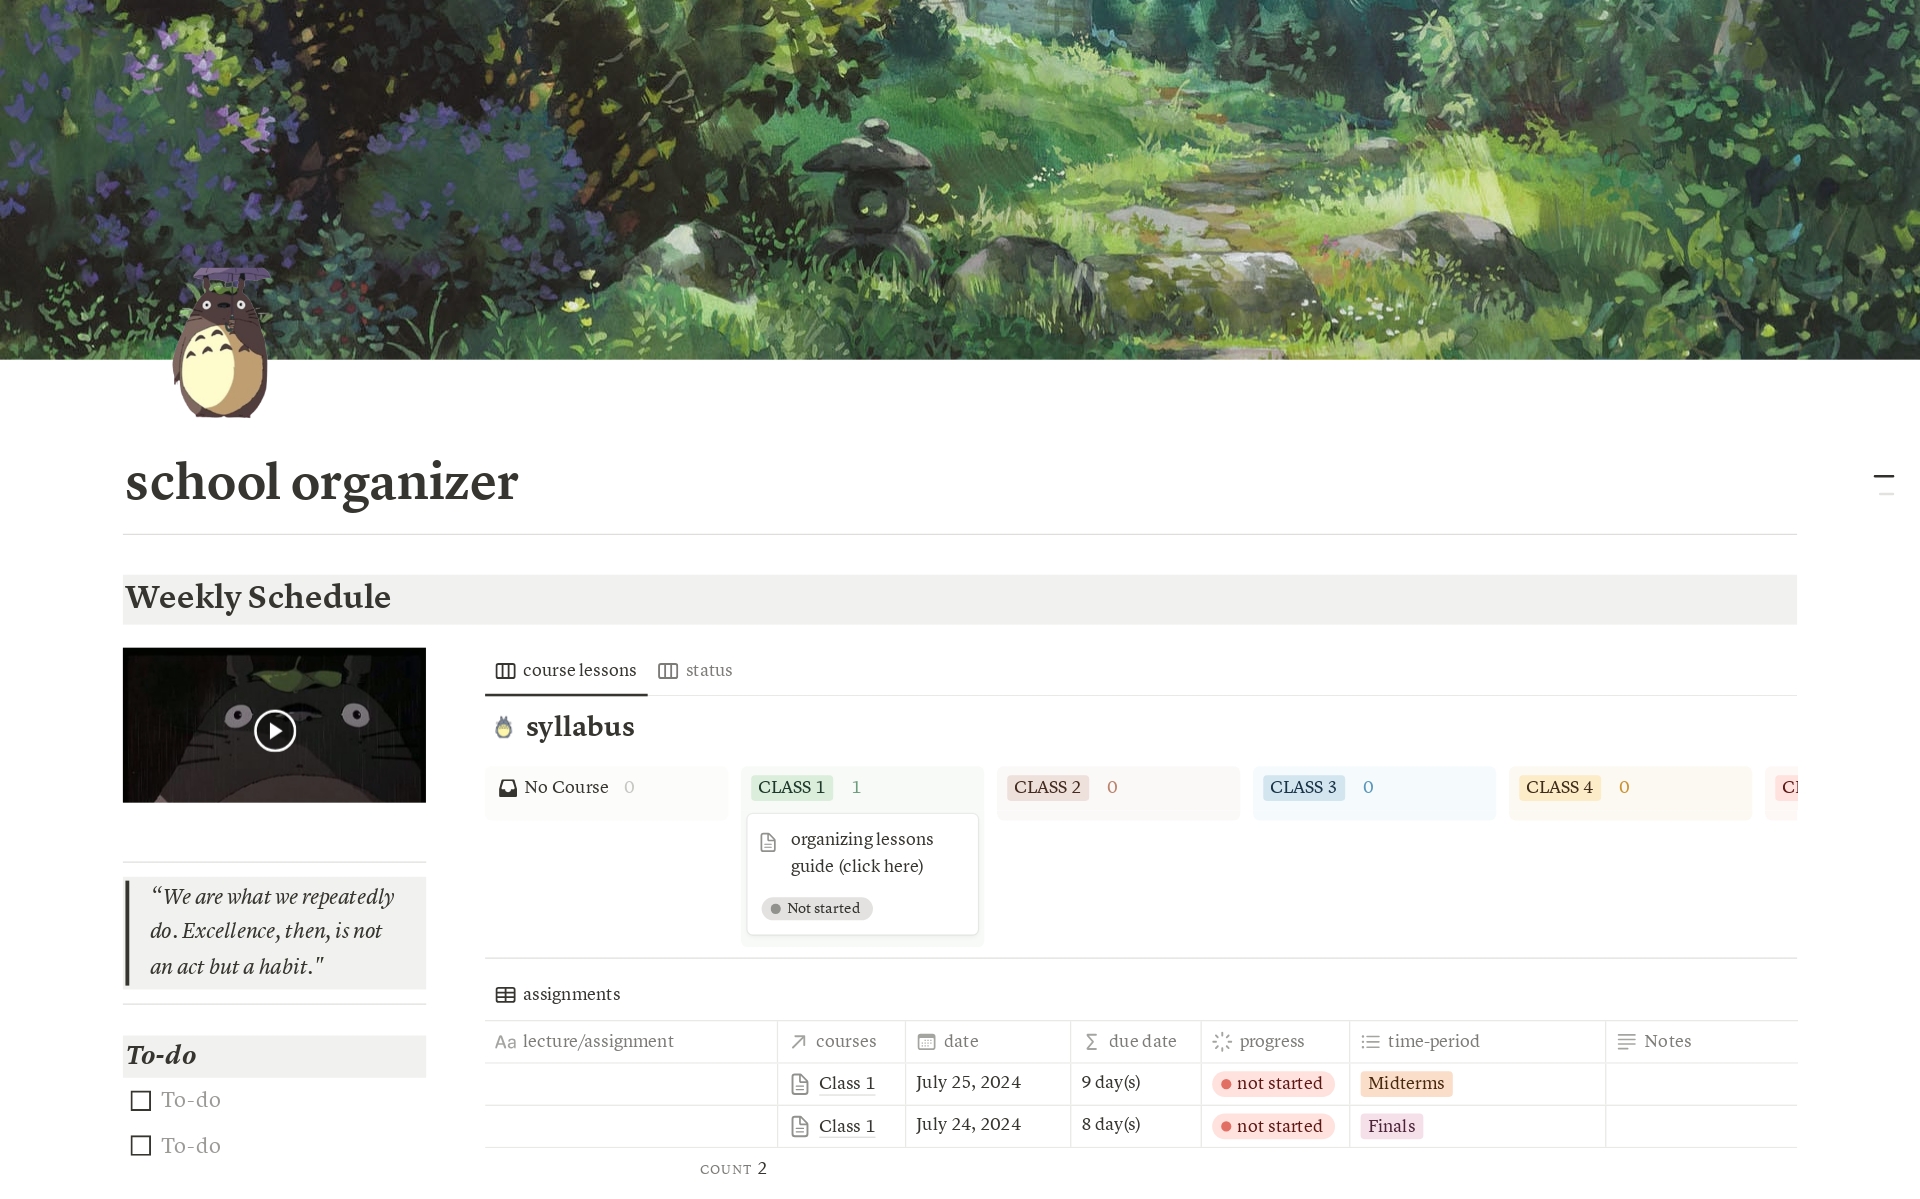 "Transform your Notion workspace into a whimsical Studio Ghibli-inspired school organizer, combining artistic flair with efficient academic planning." 